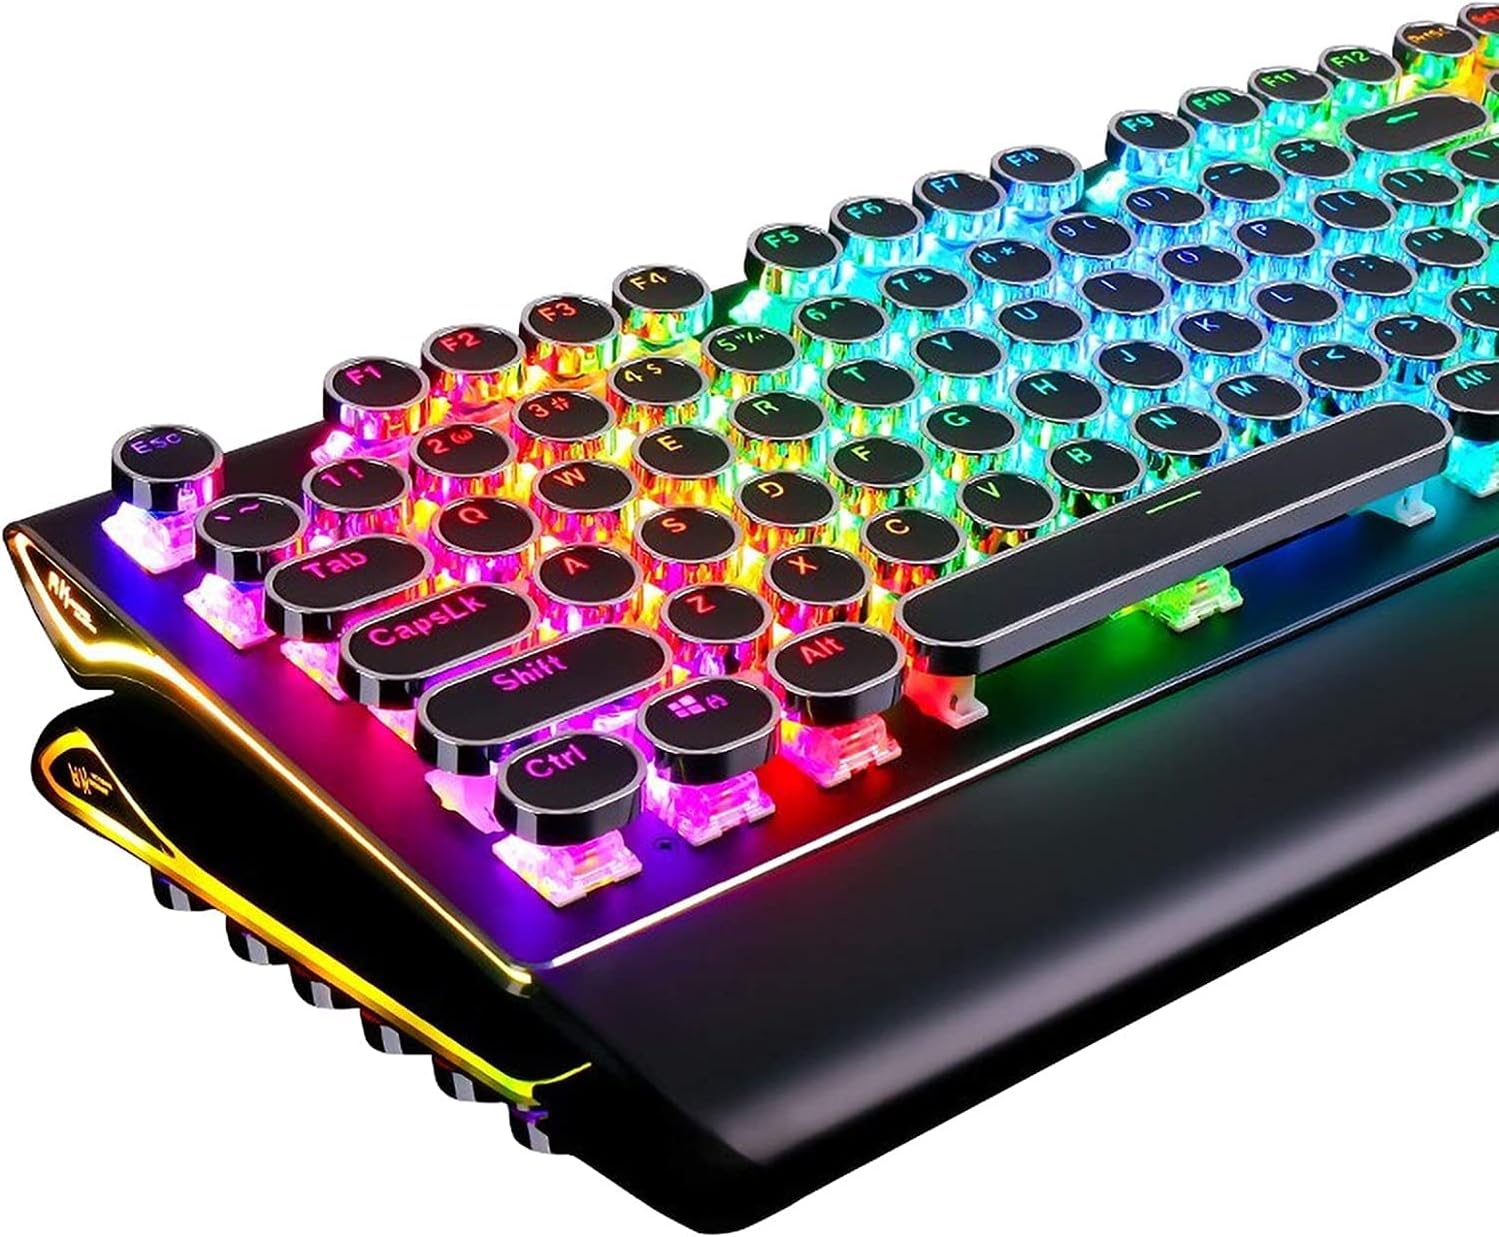 Limited-time deal: RK ROYAL KLUDGE S108 Typewriter Keyboard, Retro Mechanical Gaming Keyboard Wired 108 Keys with RGB Backlit Sidelight, Detachable Wrist Rest, Round Keyc - $53.59